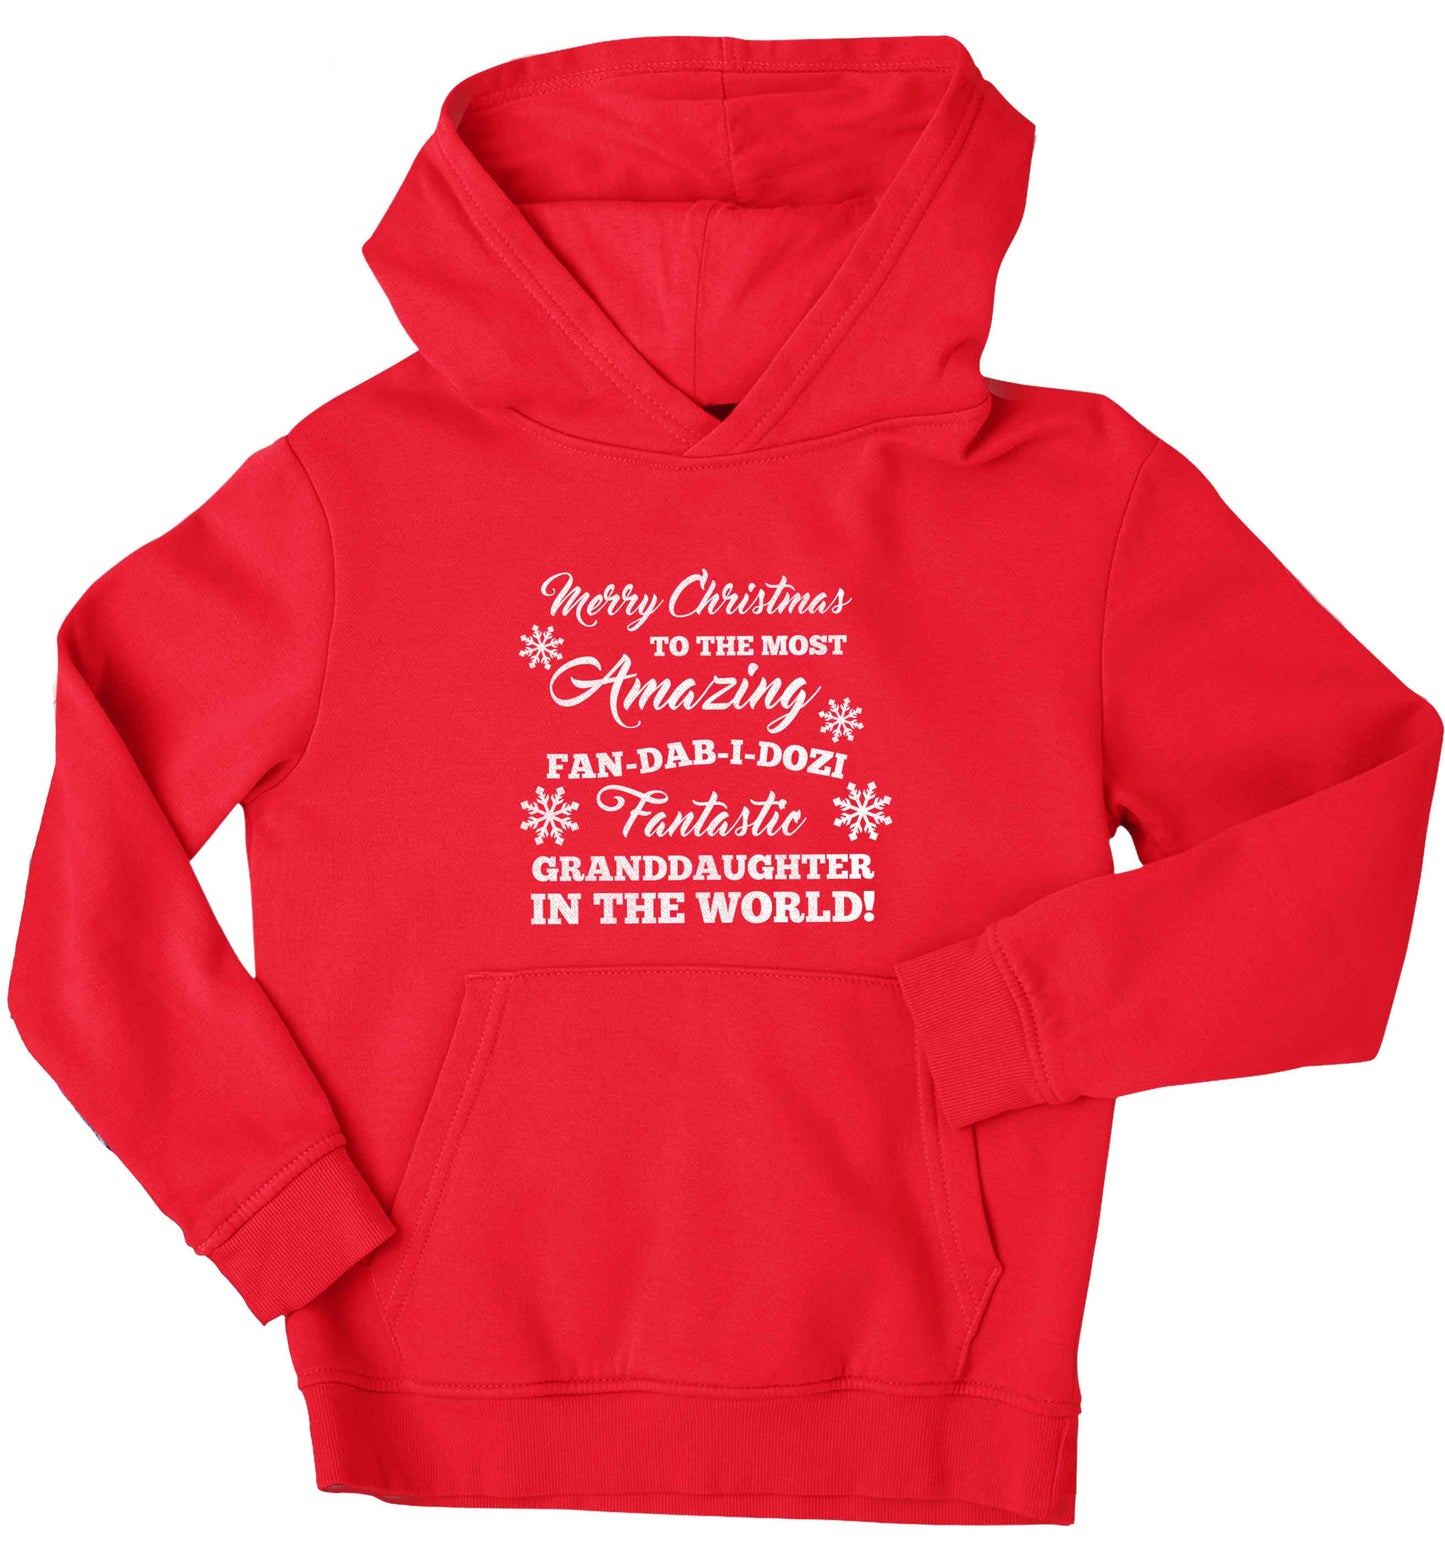 Merry Christmas to the most amazing fan-dab-i-dozi fantasic Granddaughter in the world children's red hoodie 12-13 Years